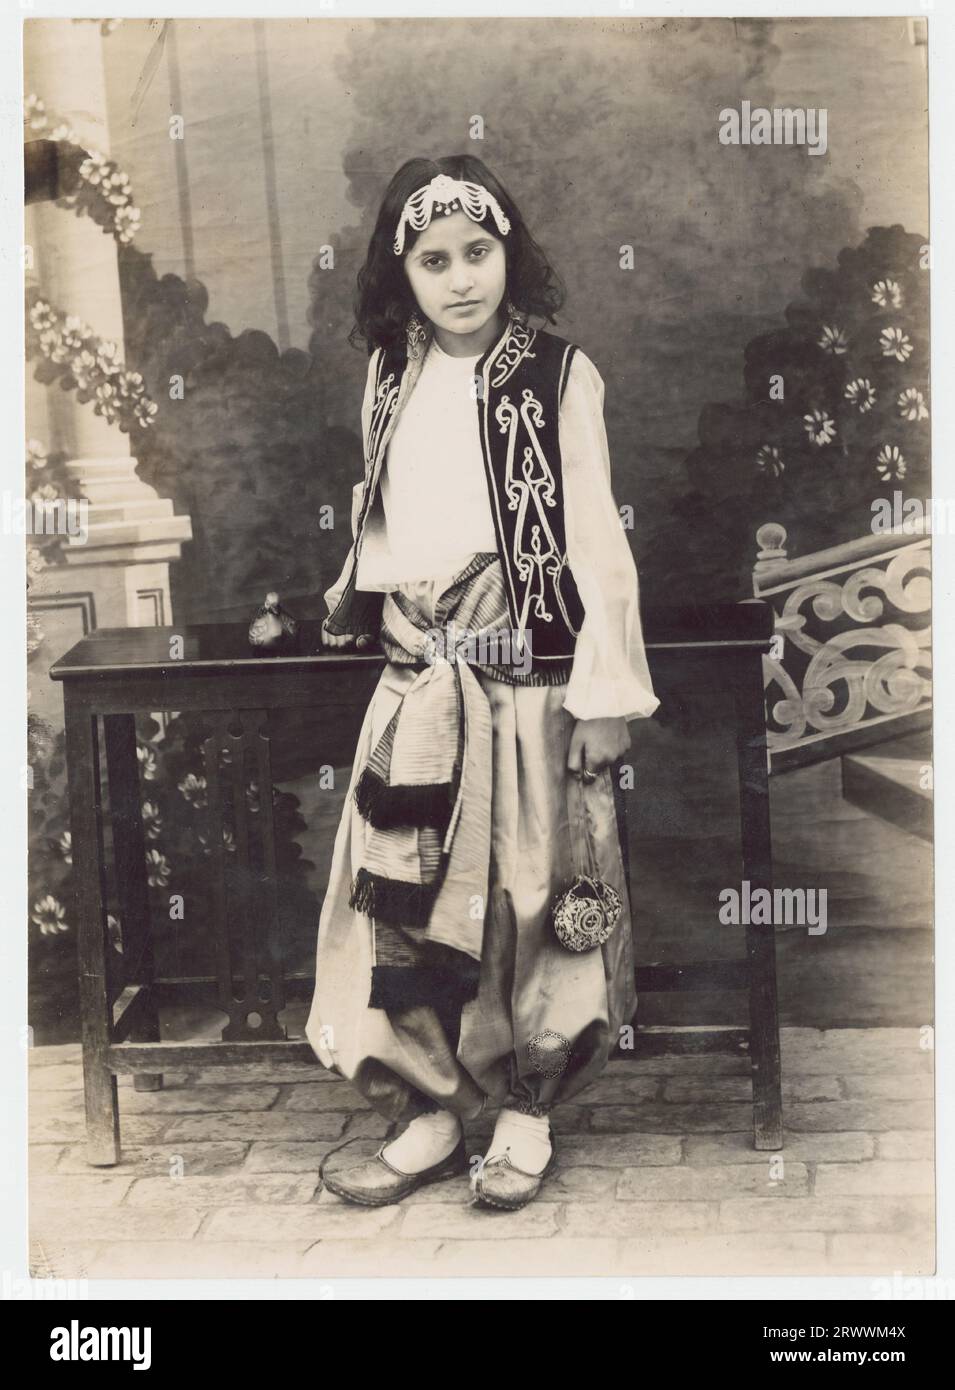 Portrait of young girl in traditional dress. This was a friend of one of the Khan family. Caption reads: 41 - Young girl (unidentified) dressed for a Christmas Pantomime. Probably Lahore, studio. C 1941 - 42 (ref not one of Sir Sikander's 10 children). Stock Photo